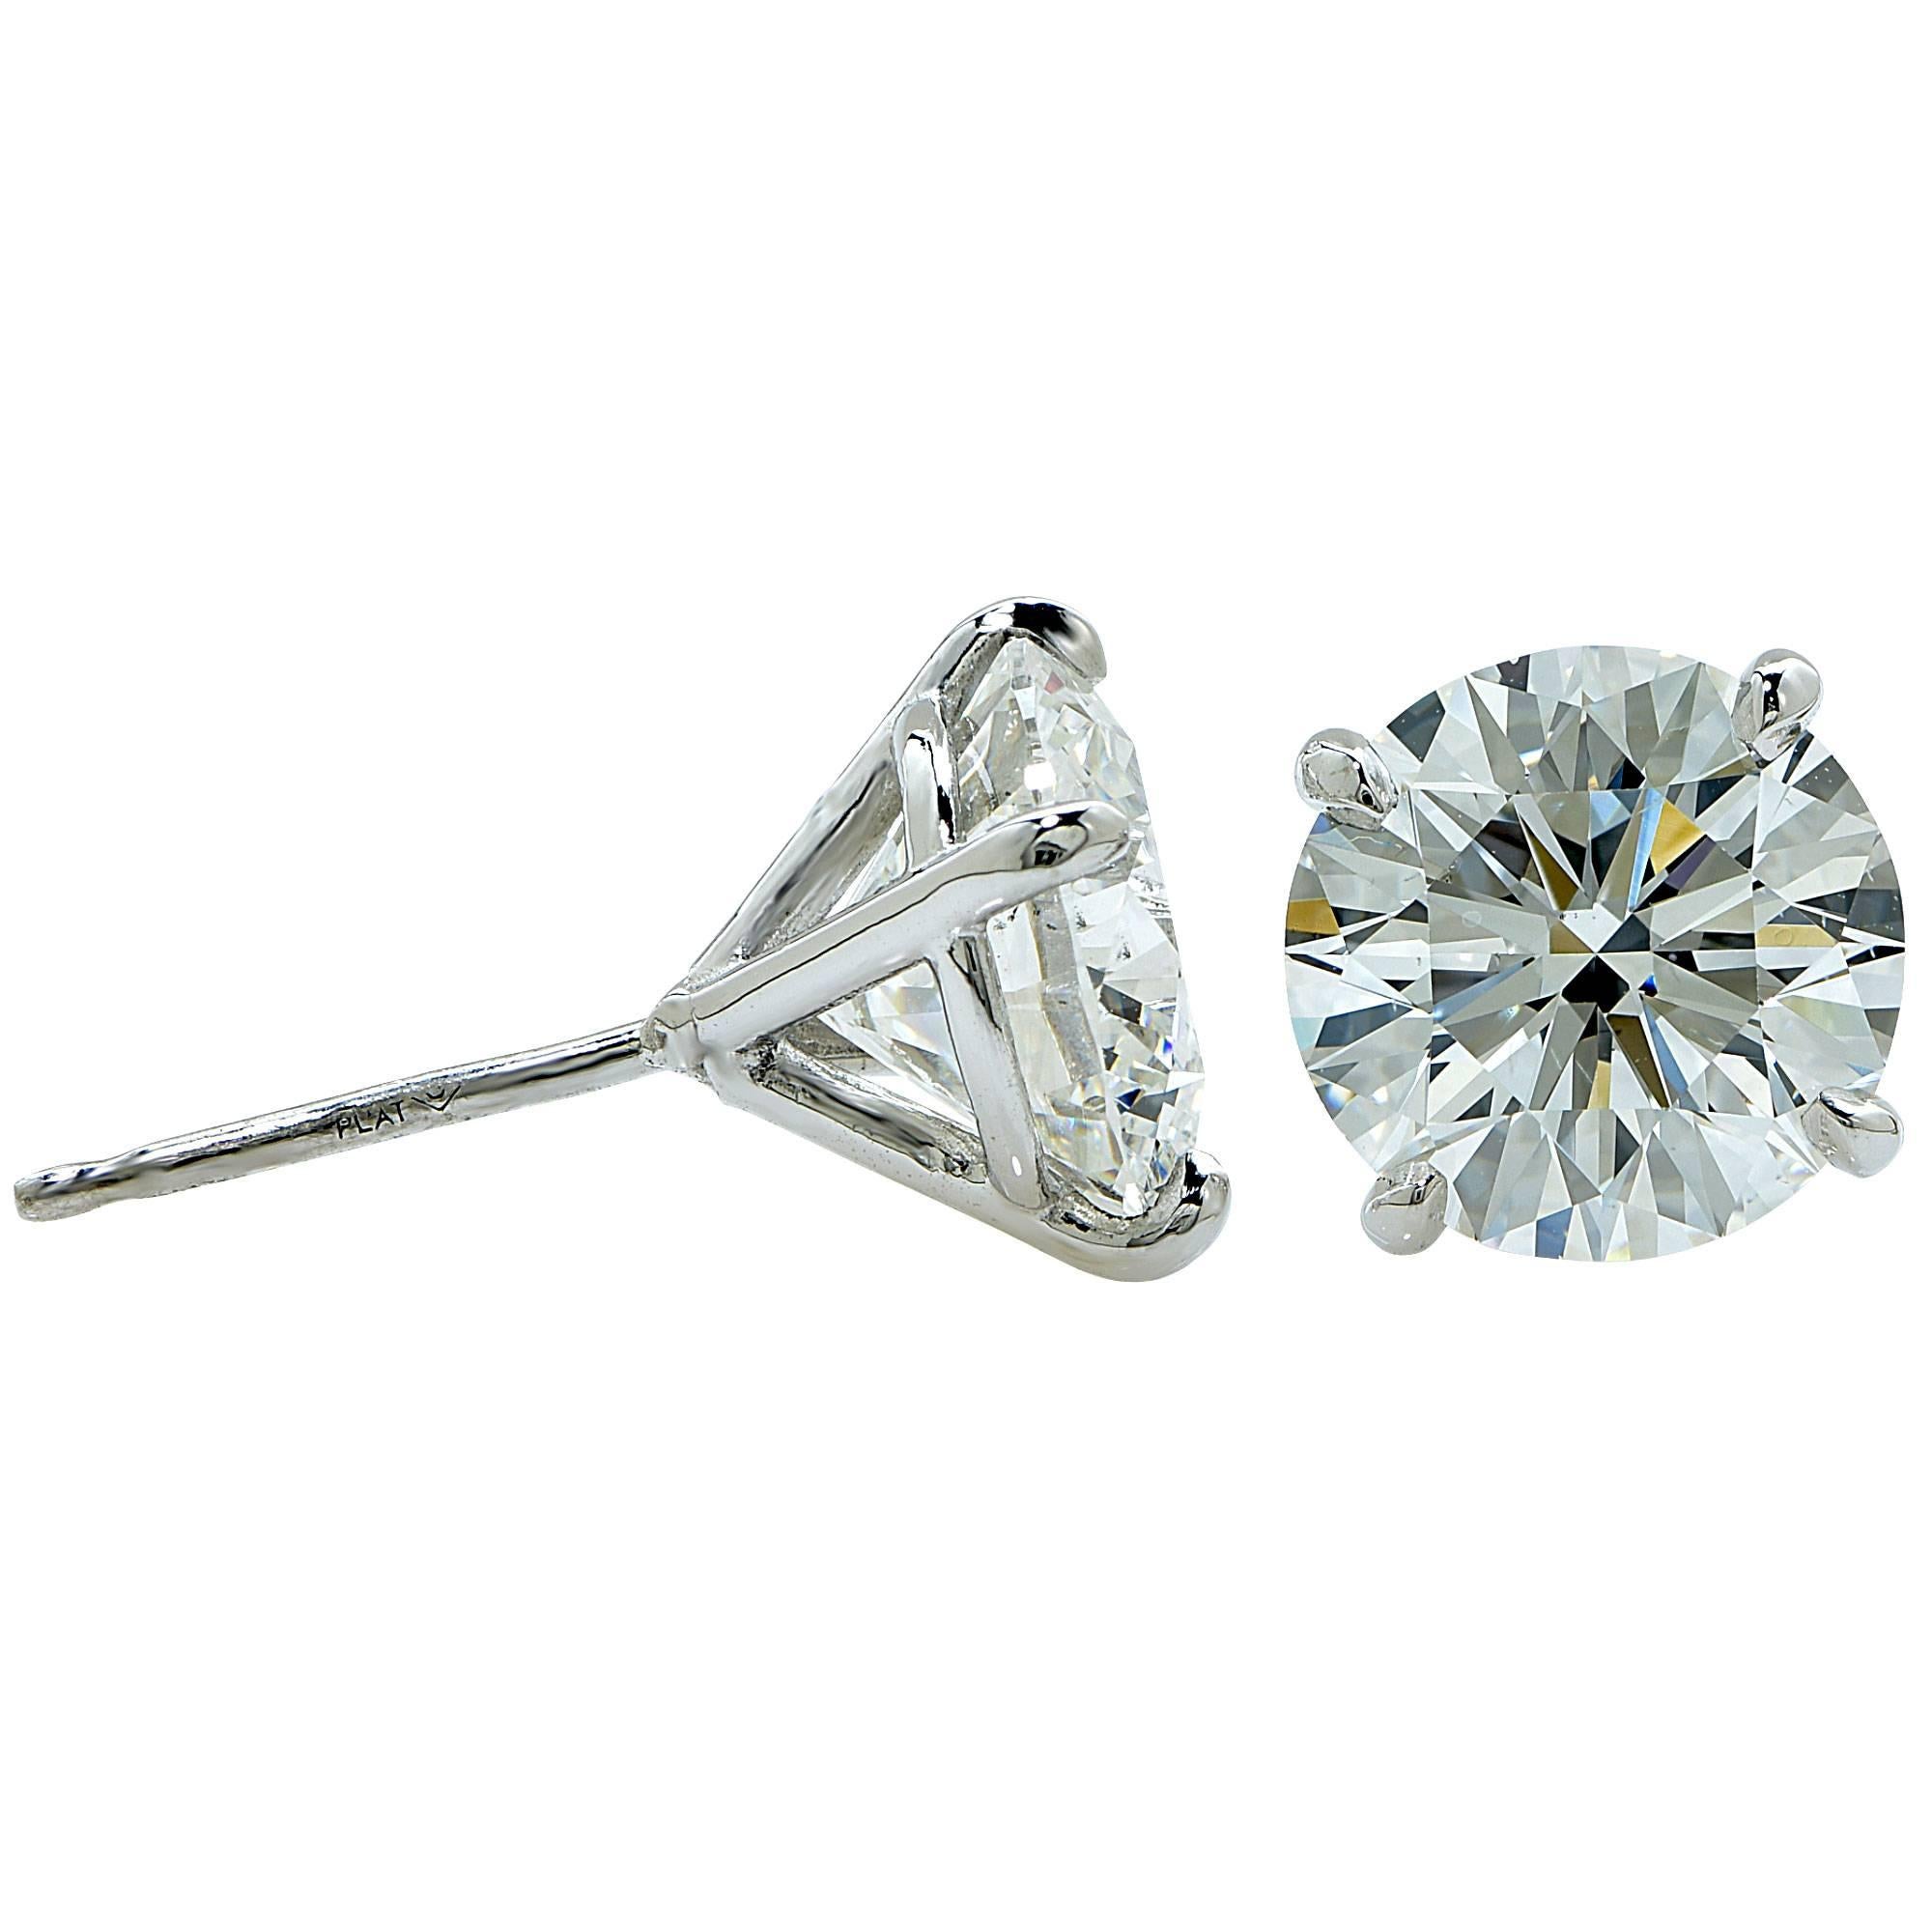 Platinum solitaire earrings featuring 2 round brilliant cut diamonds weighing 4.06cts total G color VS2 clarity GIA.

It is stamped and tested as platinum.
The metal weight is 1.55 grams.

These diamond earrings are accompanied by two GIA reports as